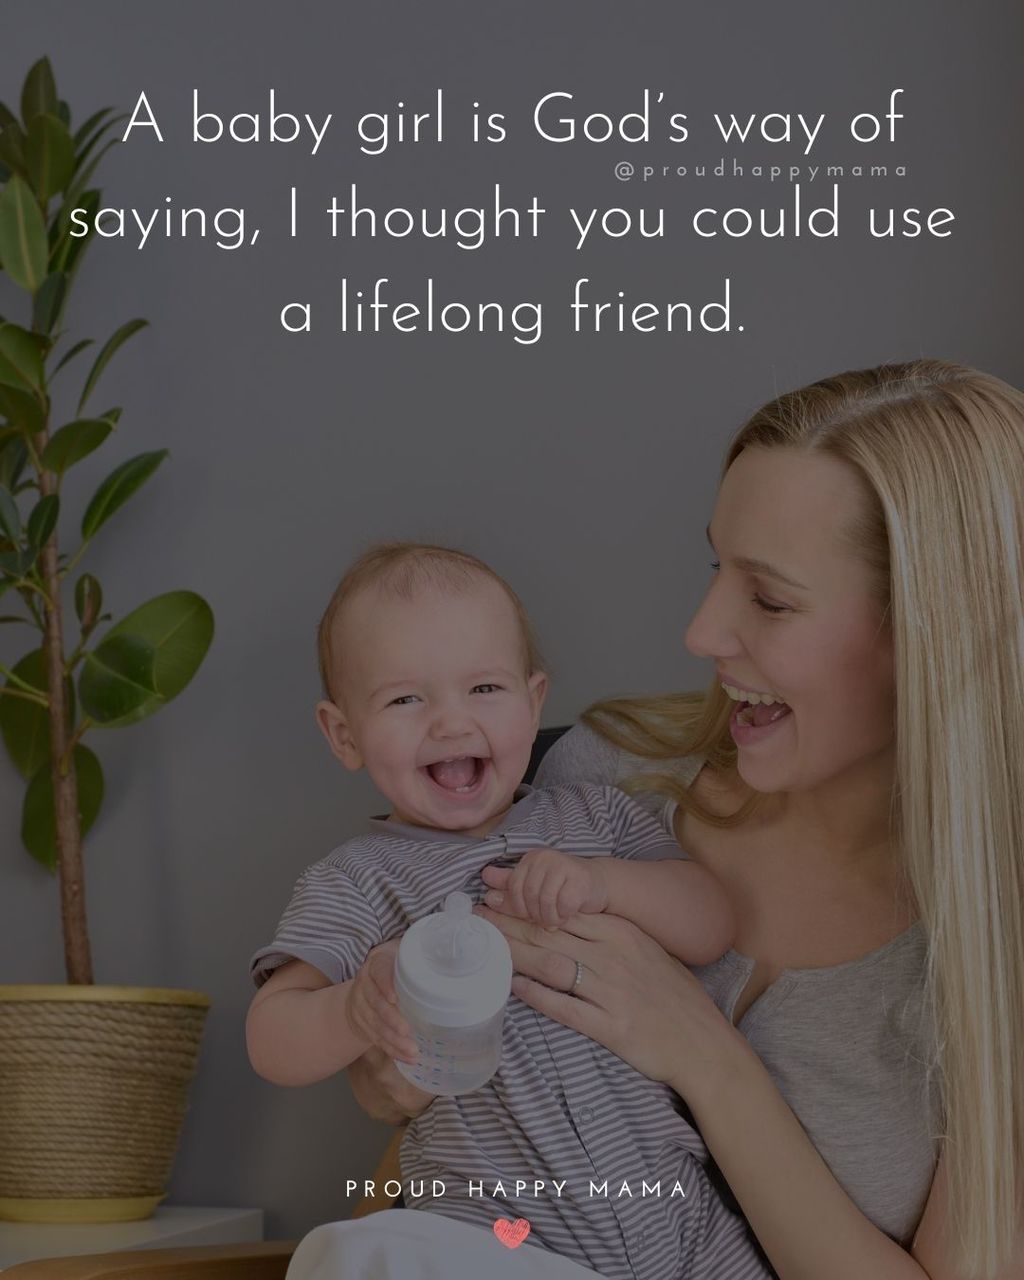 Baby Girl Quotes - A baby girl is God’s way of saying, I thought you could use a lifelong friend.